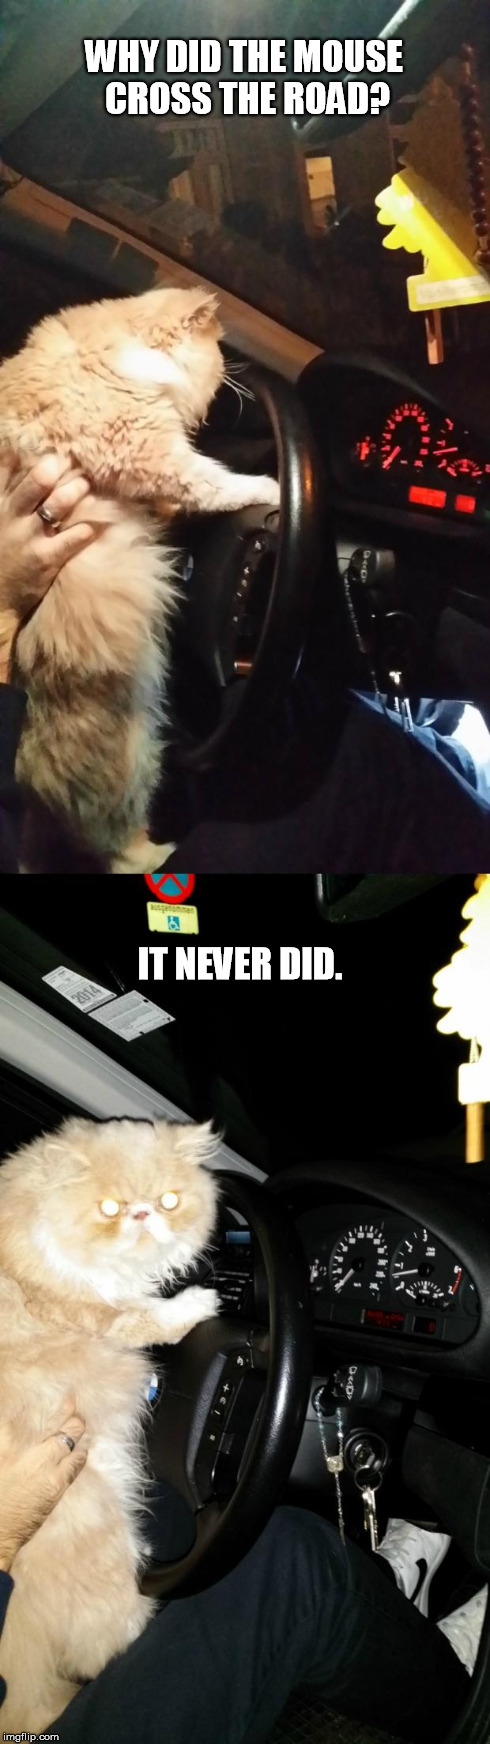 Driving Cat | WHY DID THE MOUSE CROSS THE ROAD? IT NEVER DID. | image tagged in driving cat | made w/ Imgflip meme maker